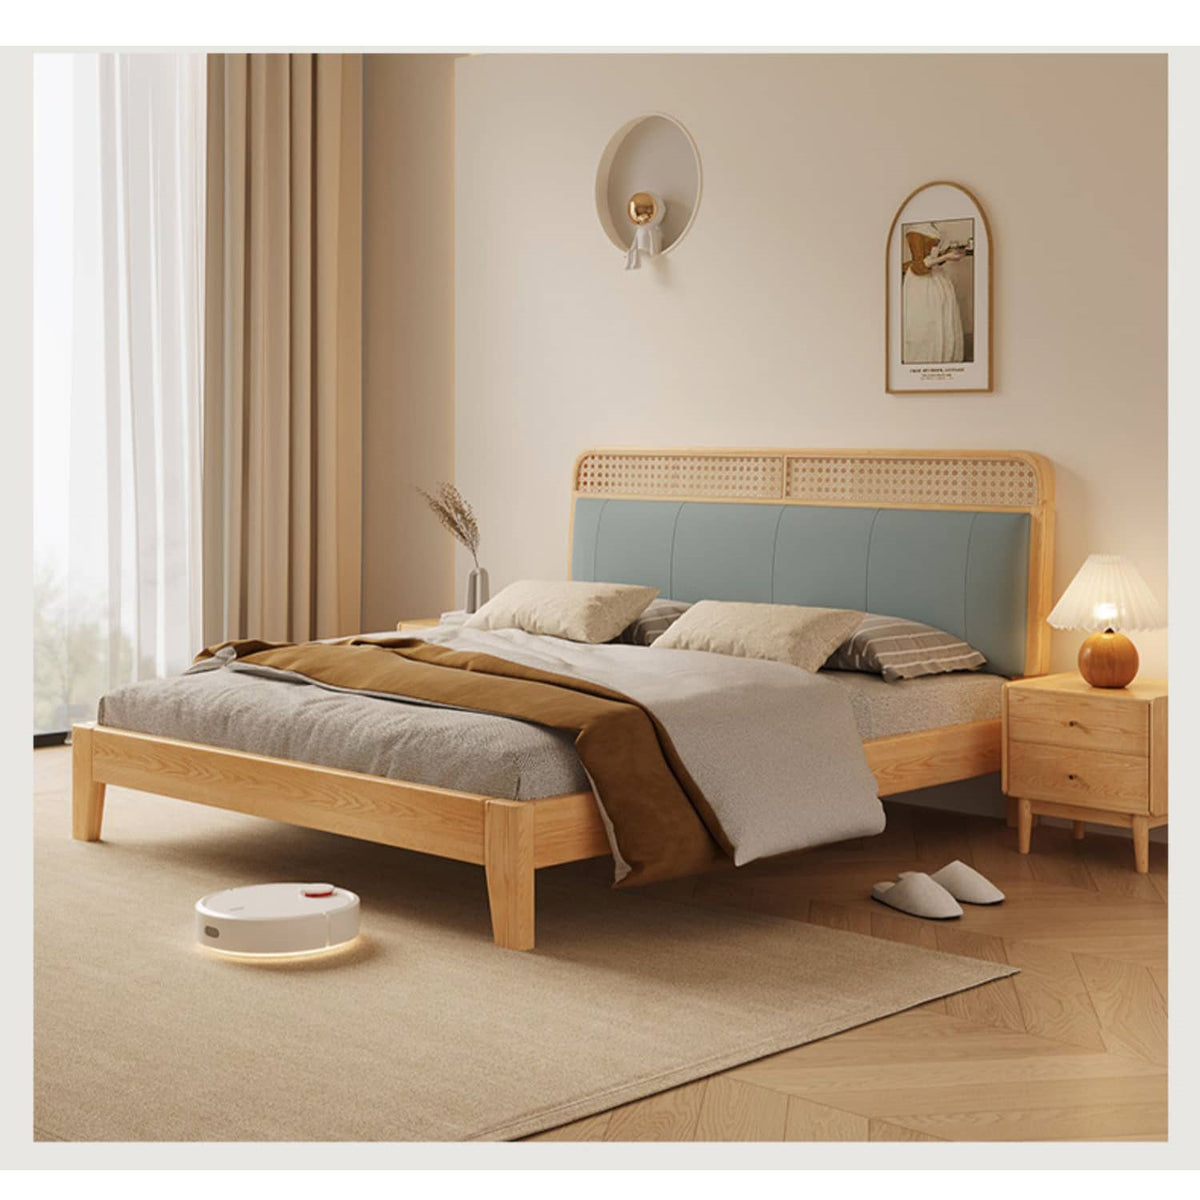 Stylish Blue and Yellow Synthetic Leather Bed with Pine and Oak Wood Elements hbzwg-636